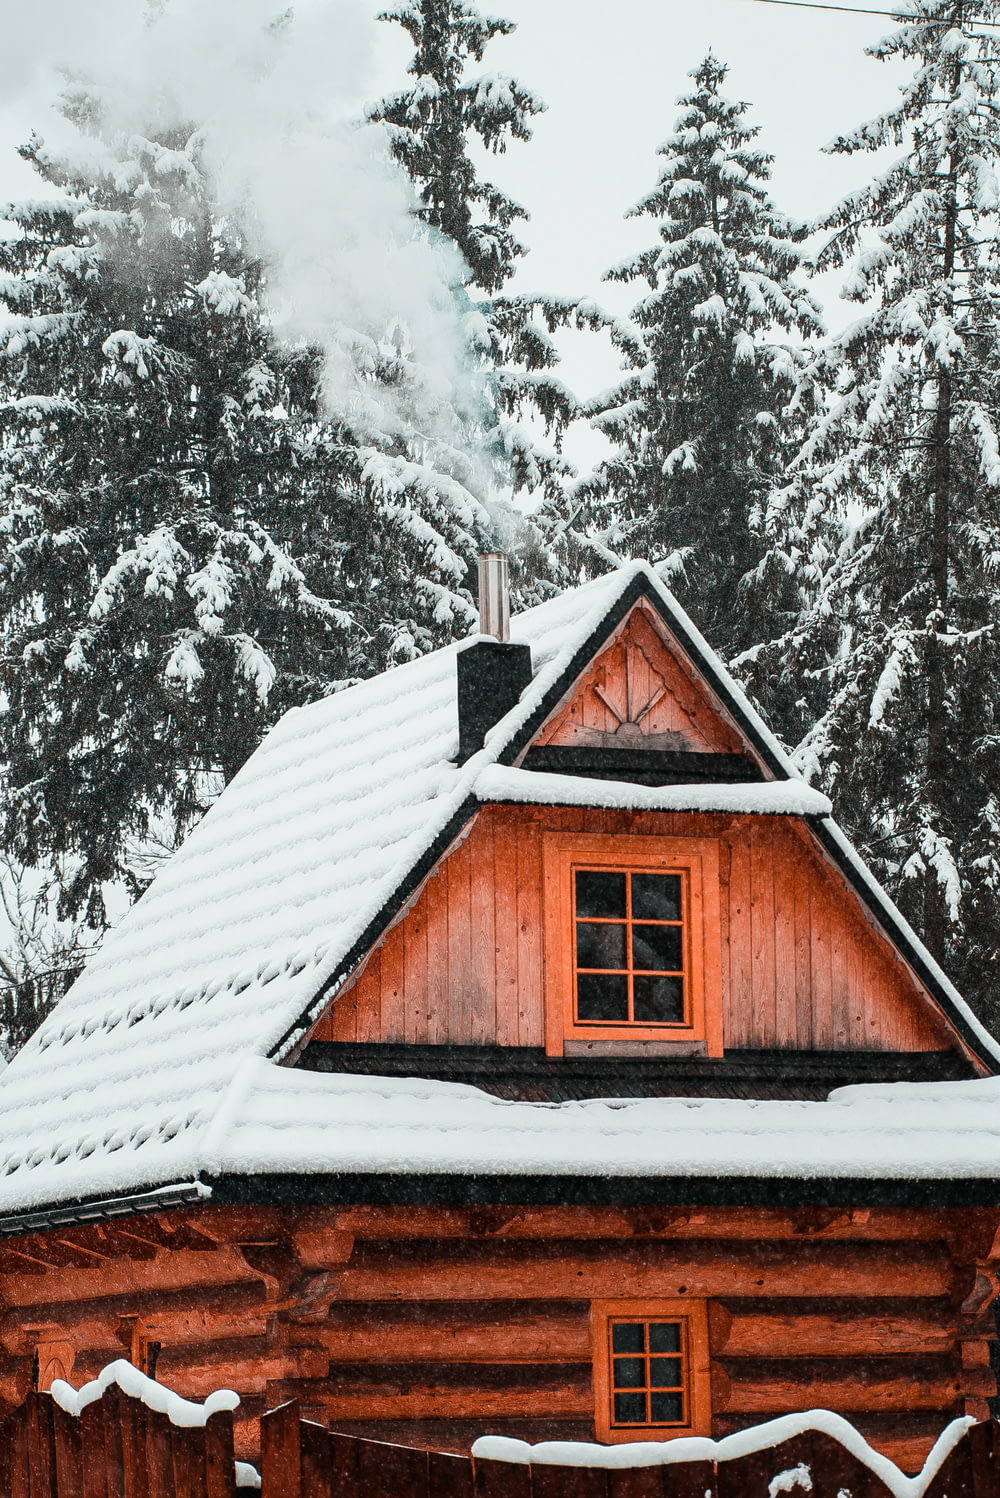 a cabin with snow on the roof and trees in the background